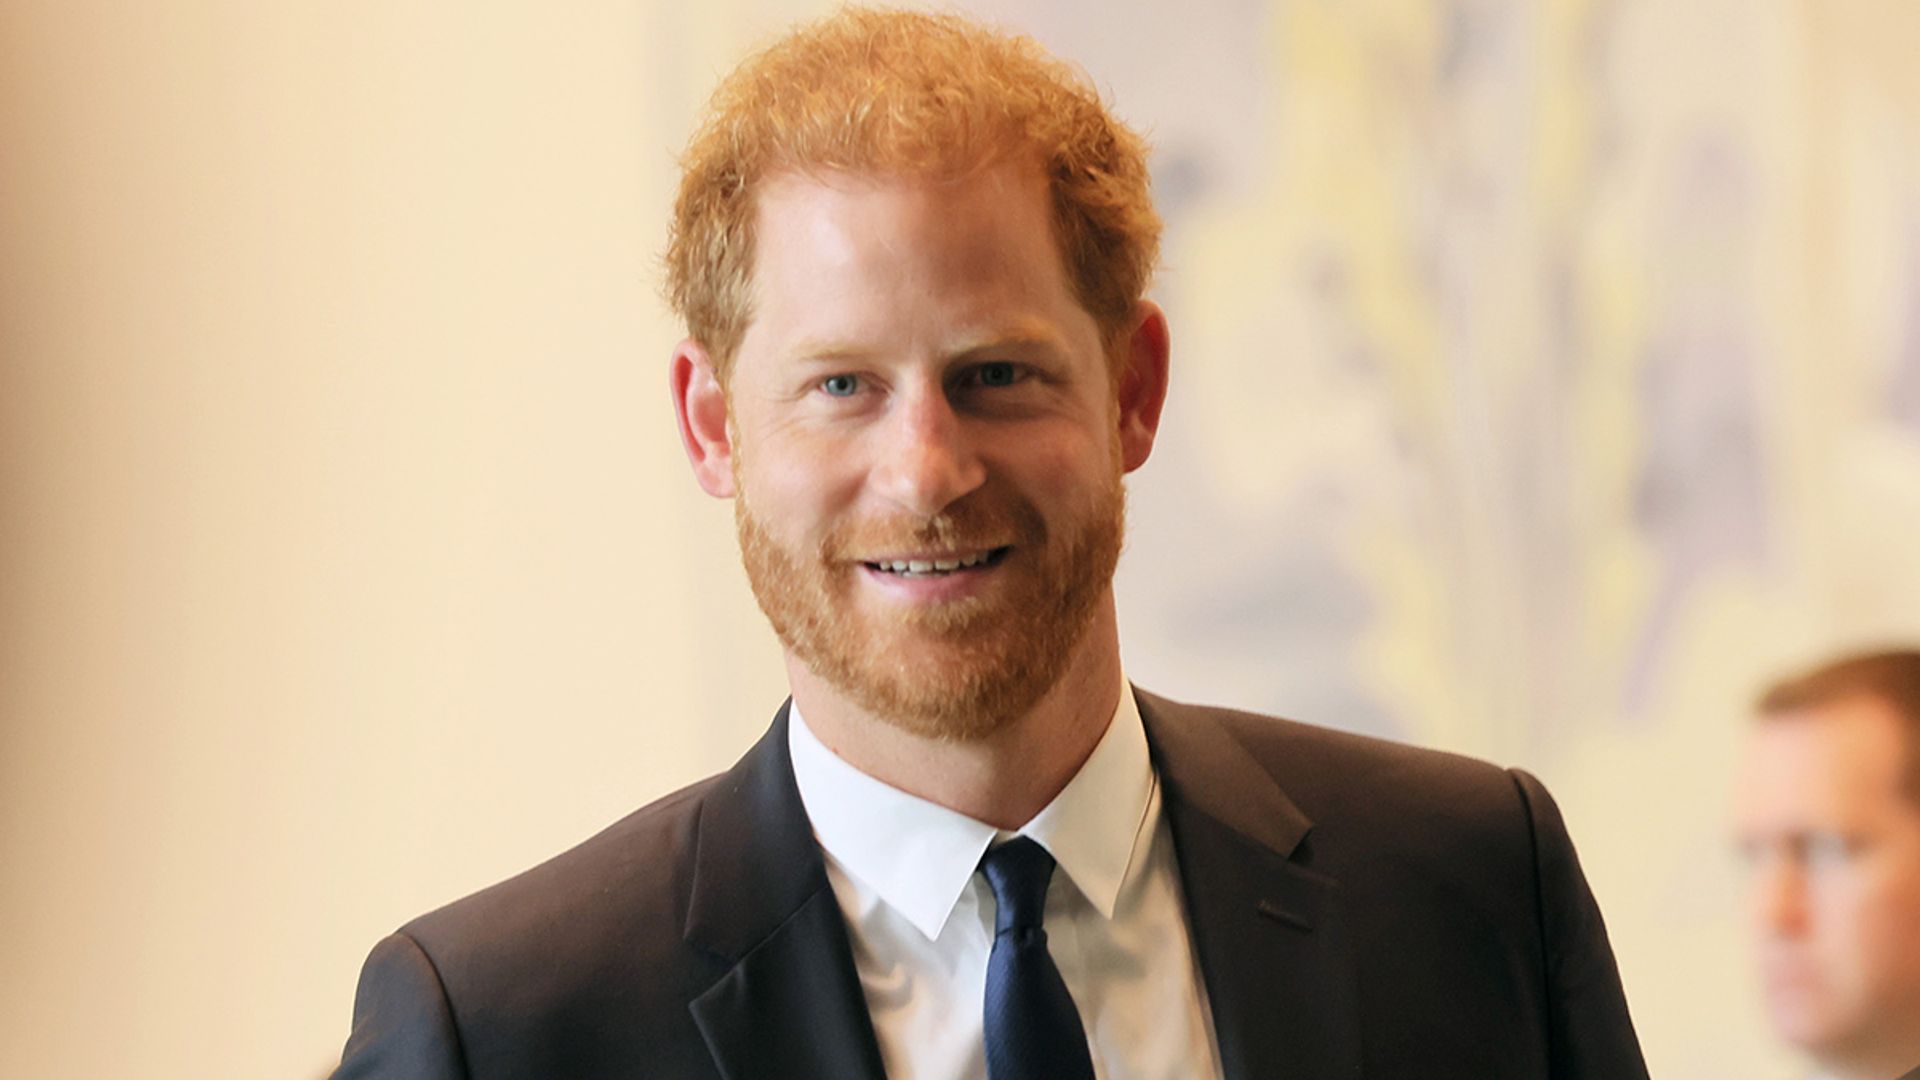 prince harry smiling in suit